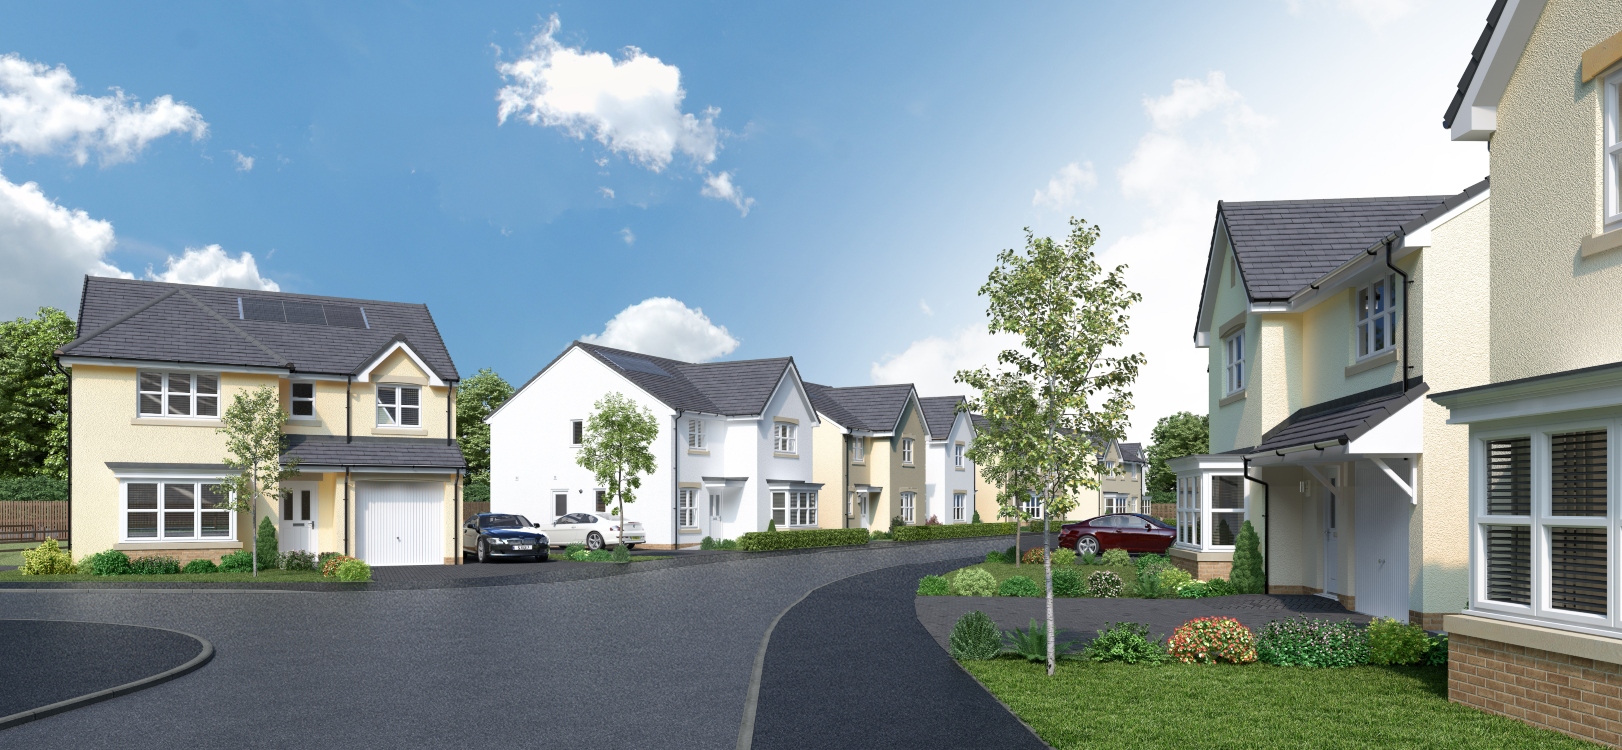 Miller Homes returns to East Ayrshire with new development